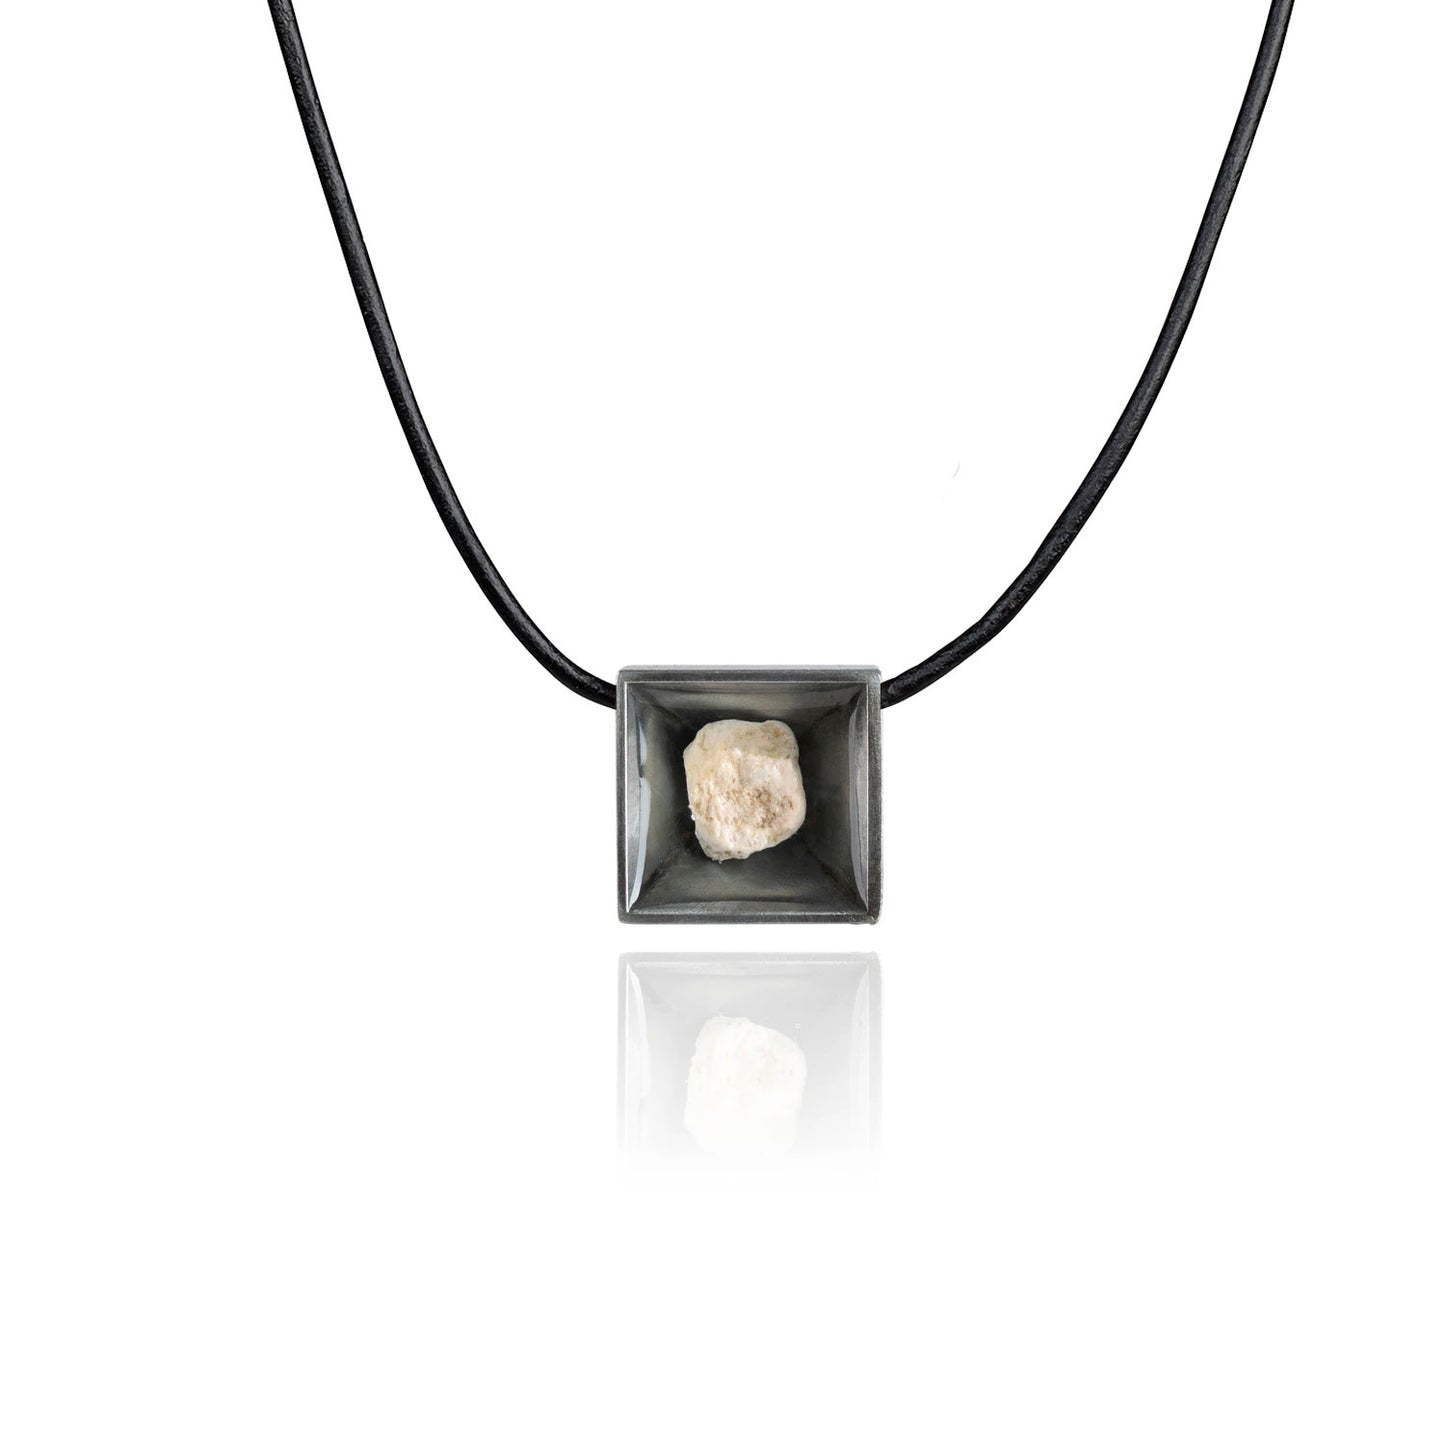 A small natural tan stone sitting in the middle of a square shaped metal pendant in a dark silver color. The pendant is hanging on a black leather necklace.